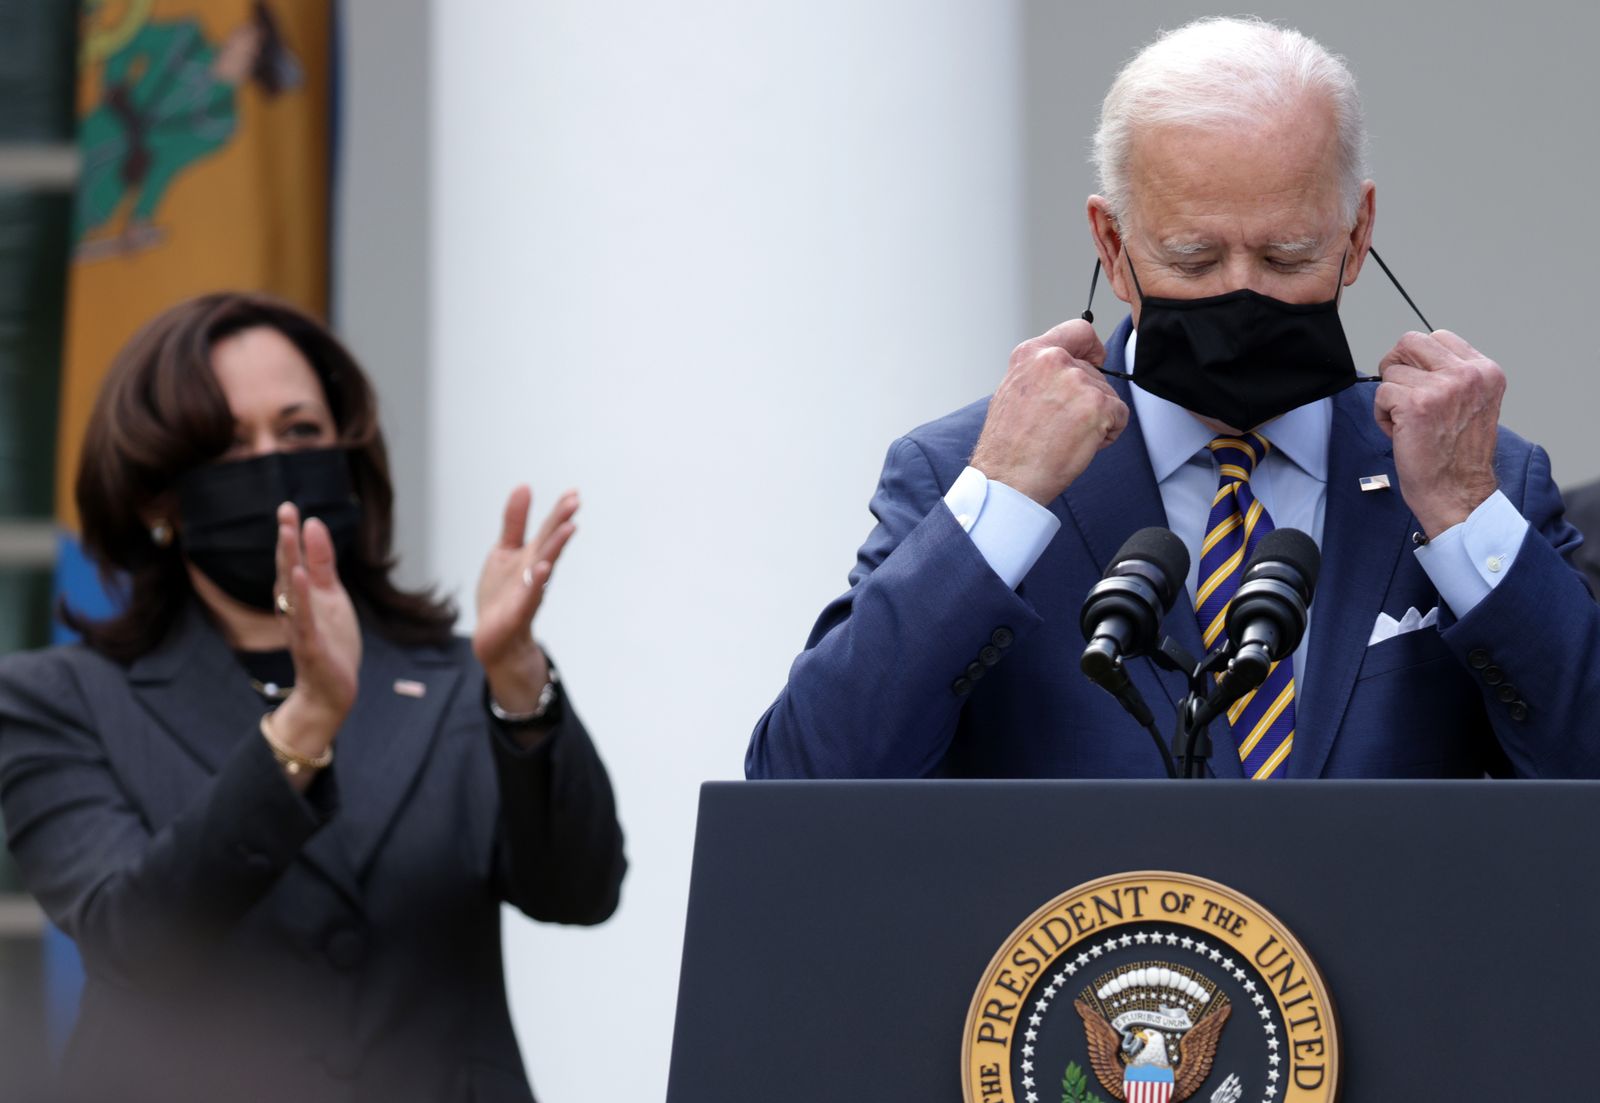 President Joe Biden takes off his mask as Vice President Kamala Harris looks on during an event on the American Rescue Plan in the Rose Garden of the White House on March 12, 2021